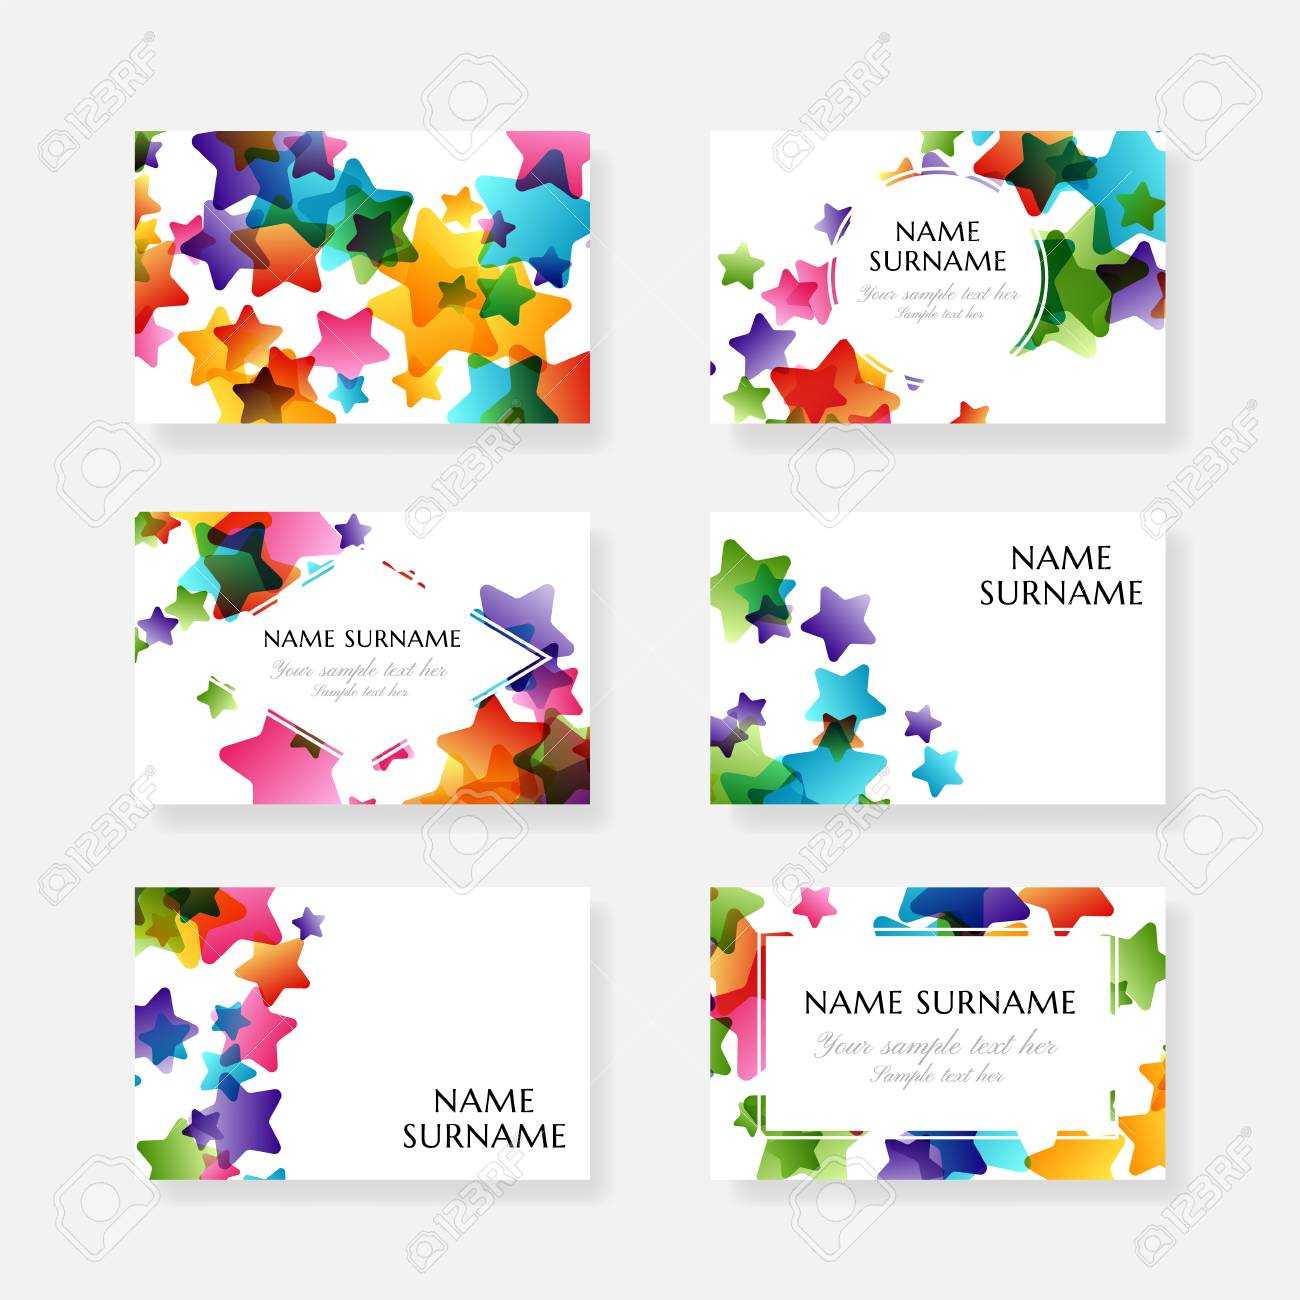 Creative Kids Design Collection. Vector Cards With Colorful Stars,.. Pertaining To Credit Card Template For Kids